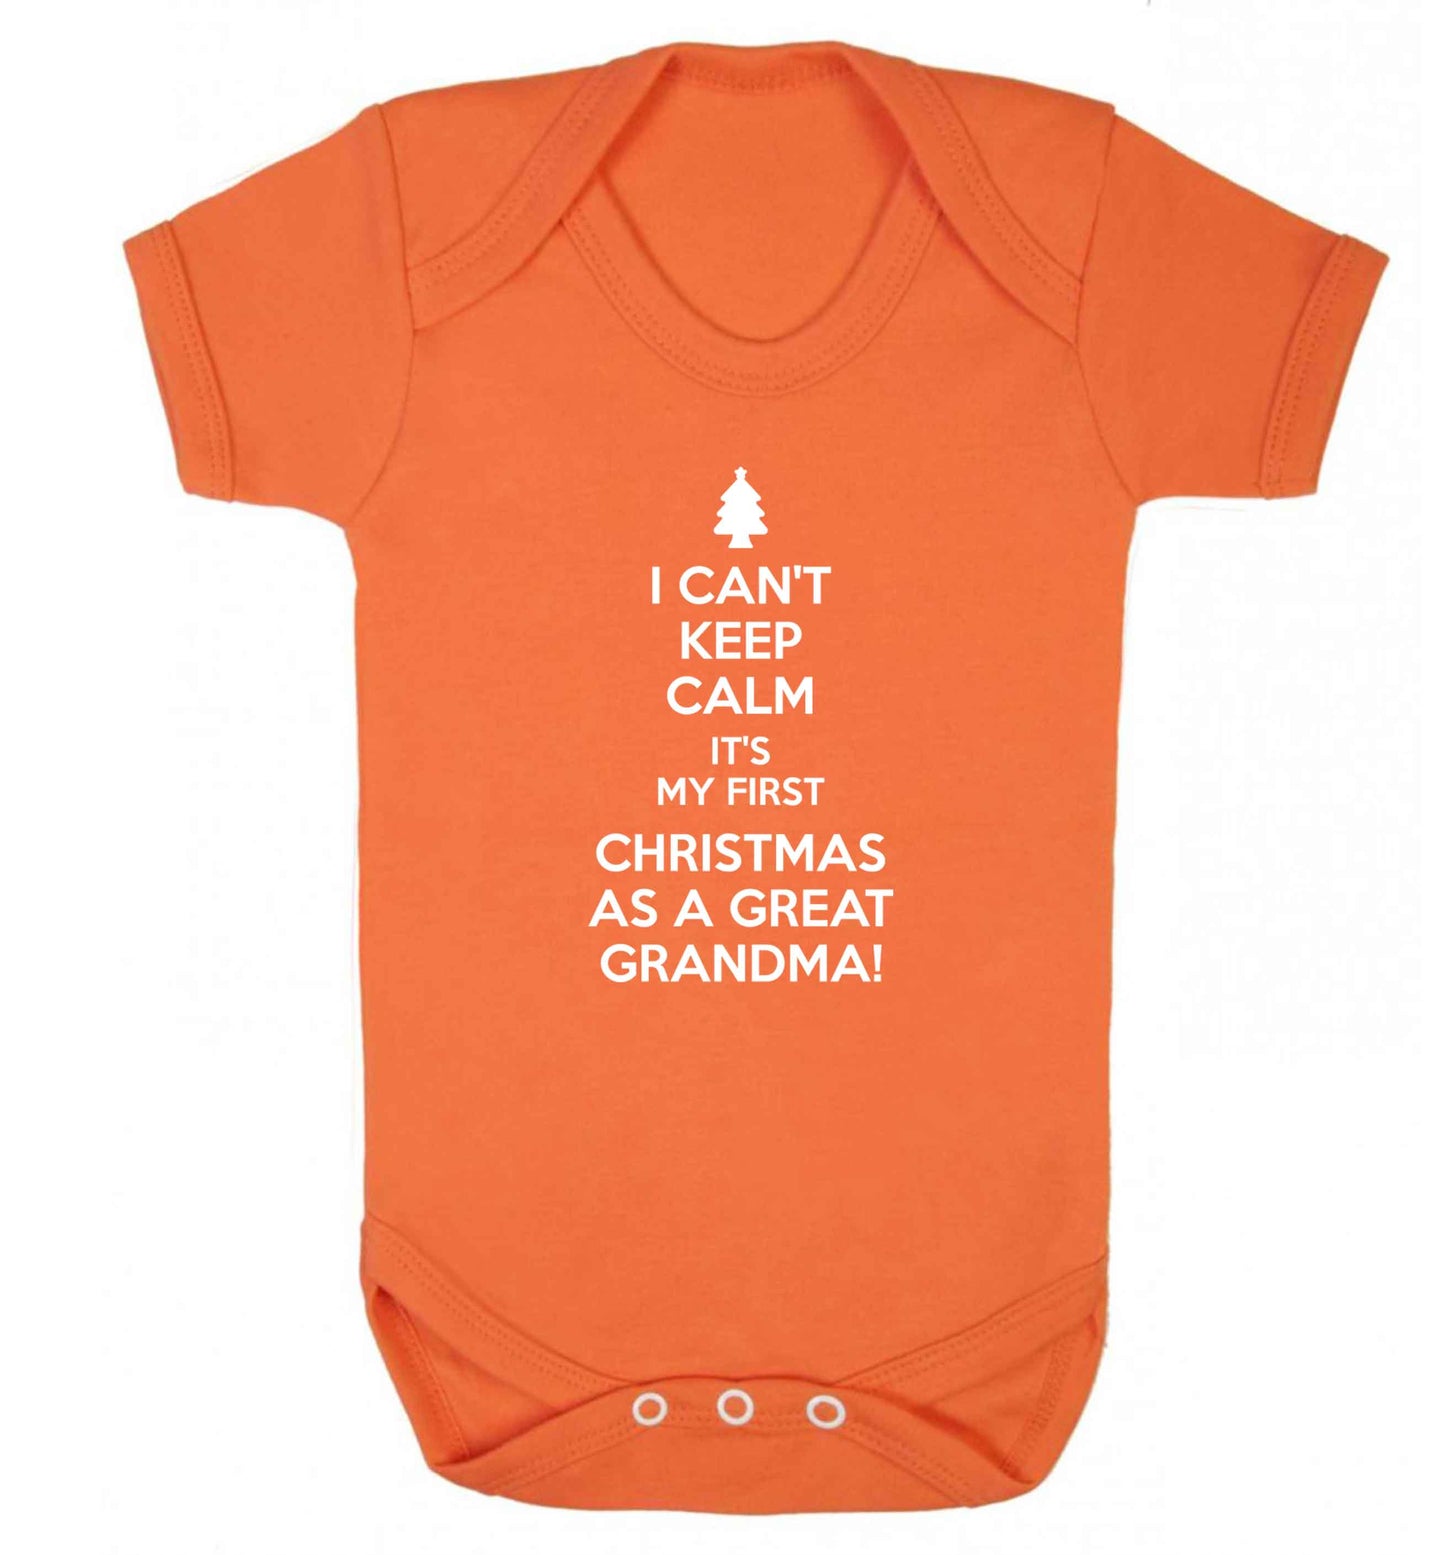 I can't keep calm it's my first Christmas as a great grandma! Baby Vest orange 18-24 months